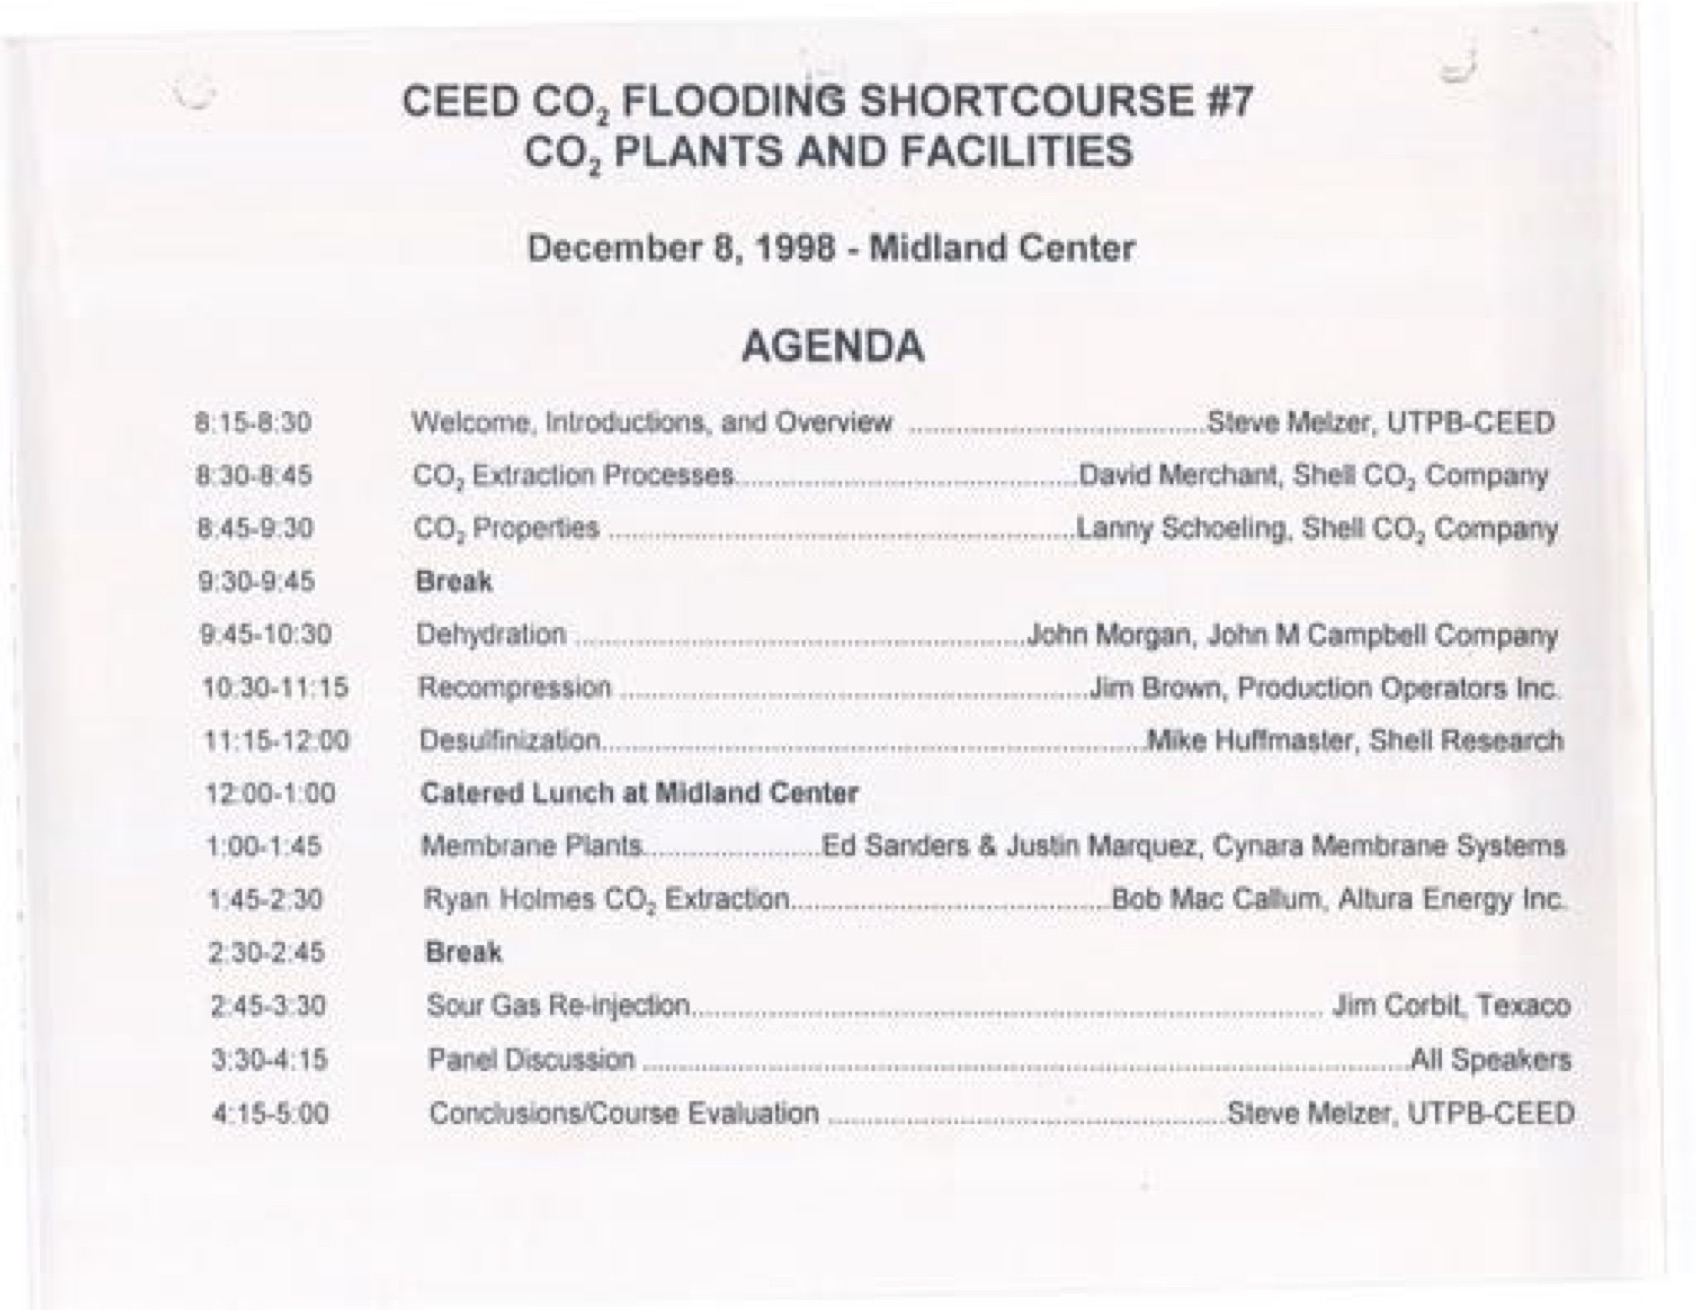 1998 Ceed Co2 Flooding Shortcourse “co2 Facilities And Plants” Co2 Conference